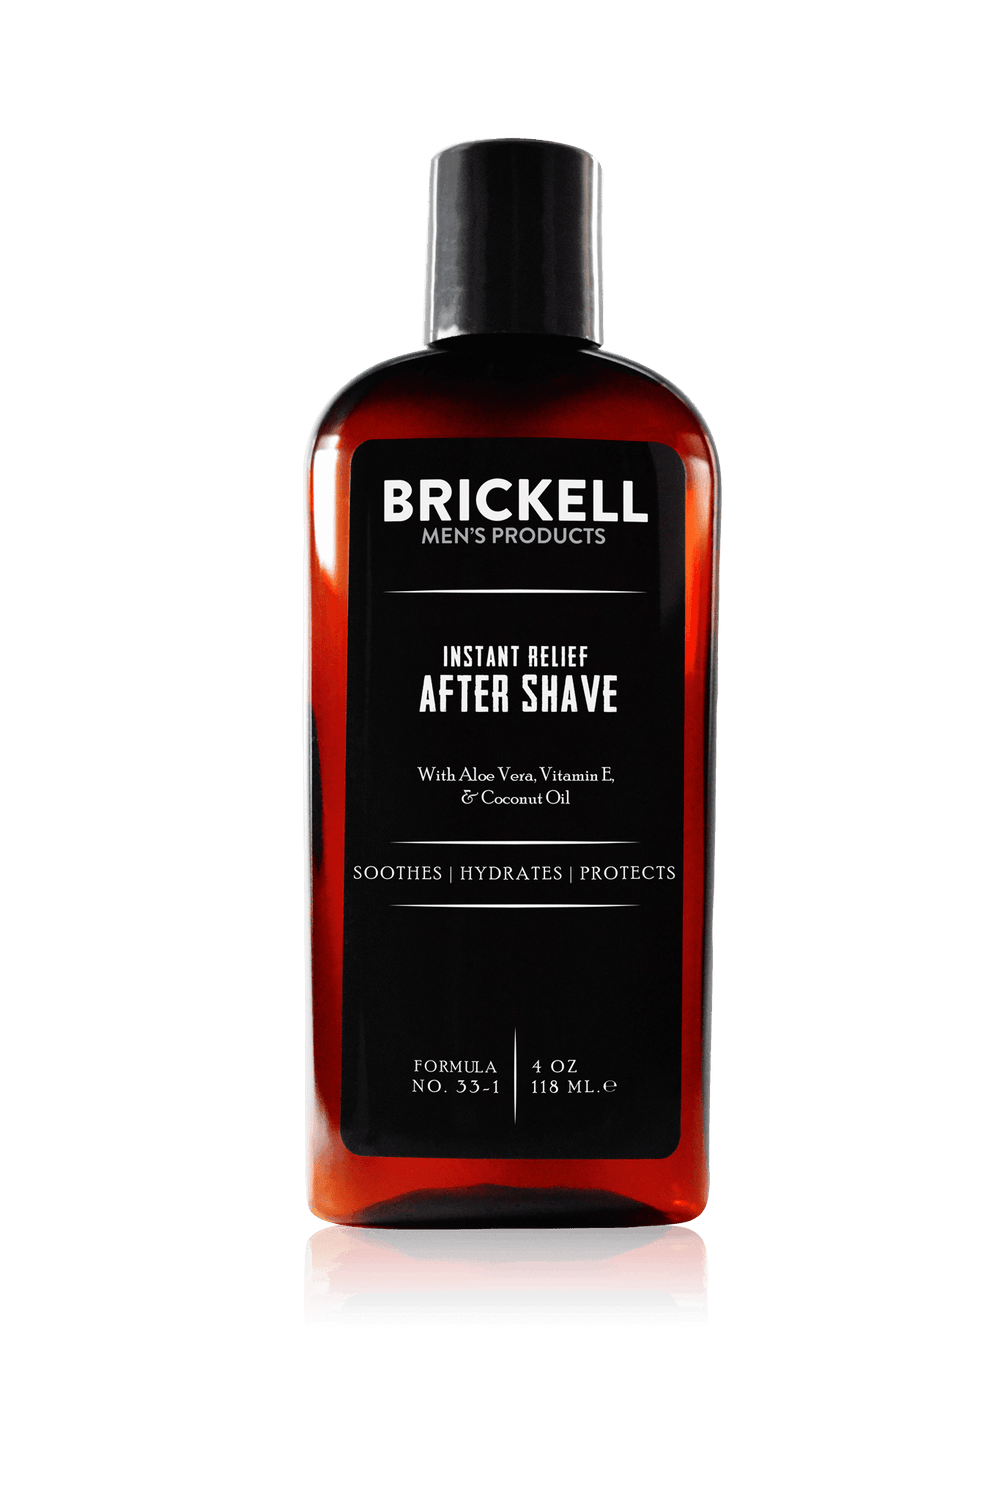 Men's Natural Aftershave & Shaving Cream | Brickell Men's Products ...